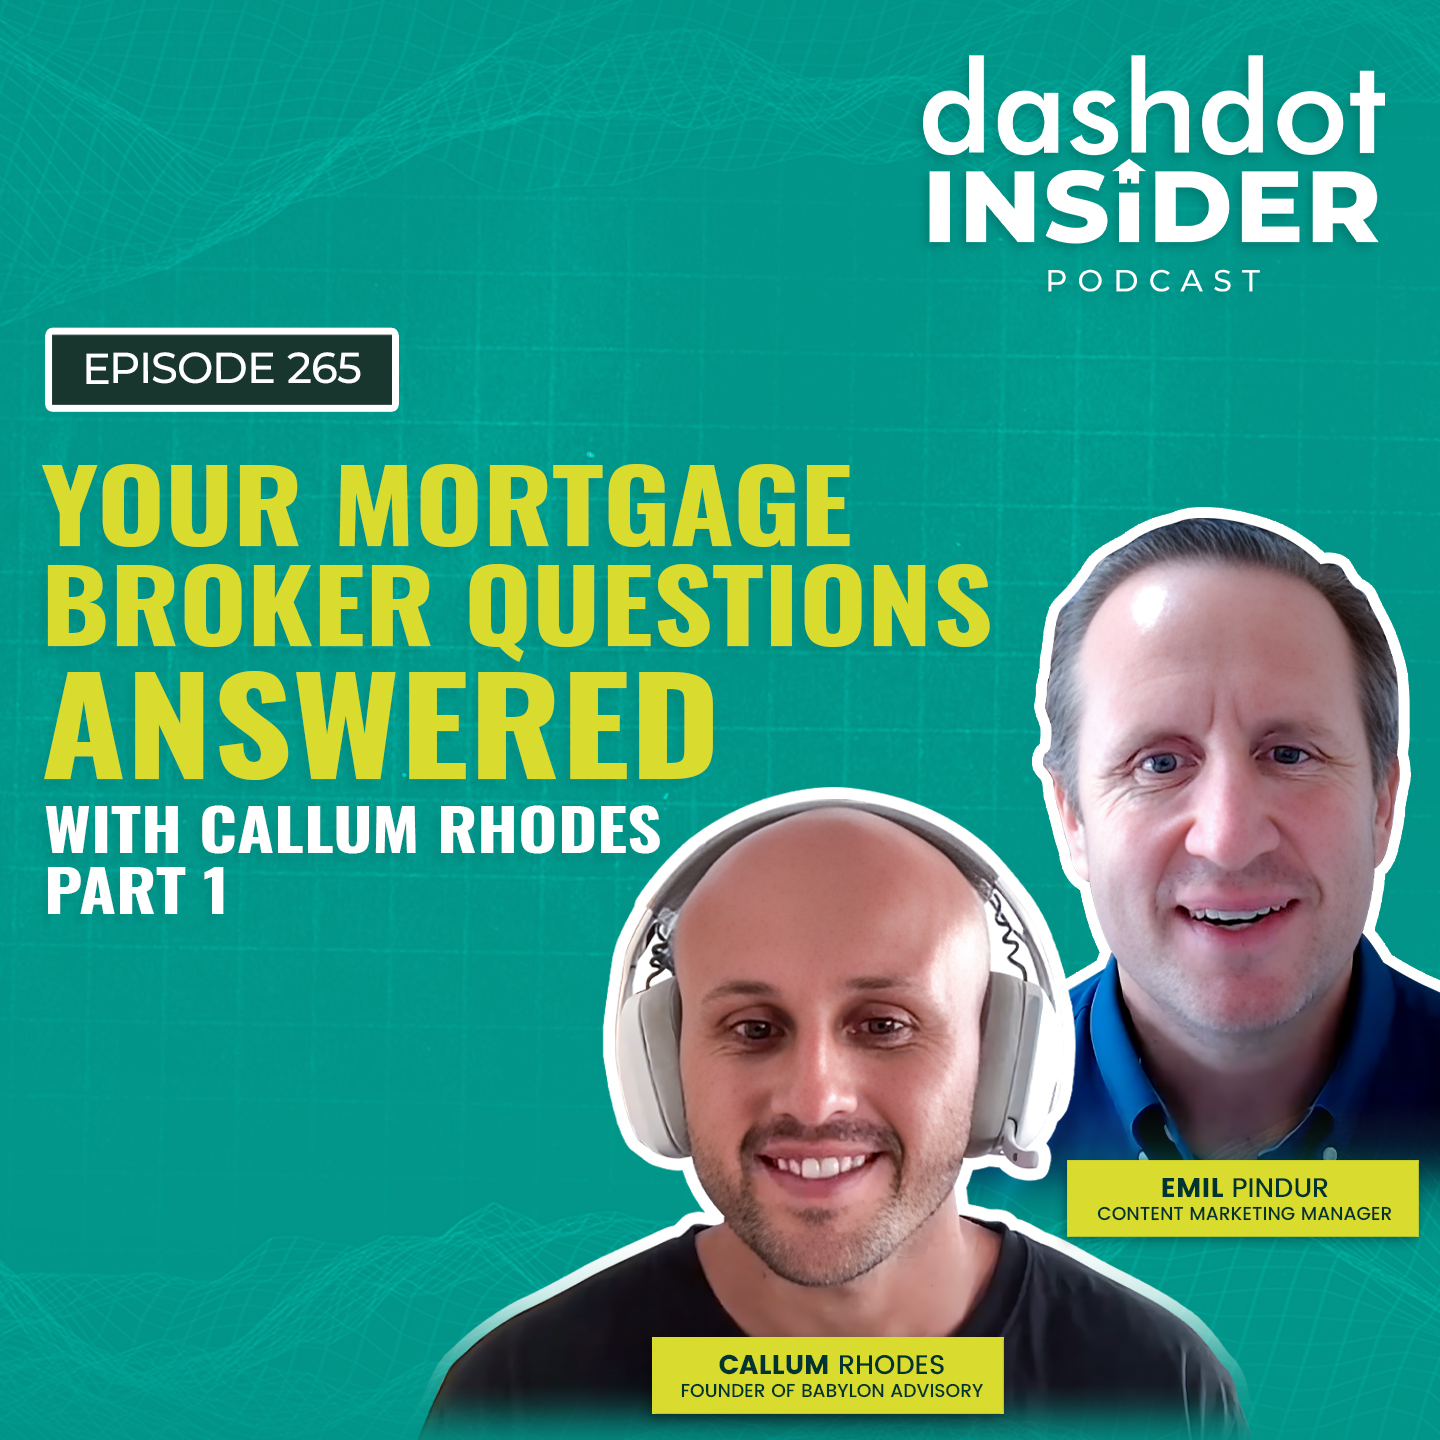 Your Mortgage Broker Questions Answered with Callum Rhodes Part 1 | #265